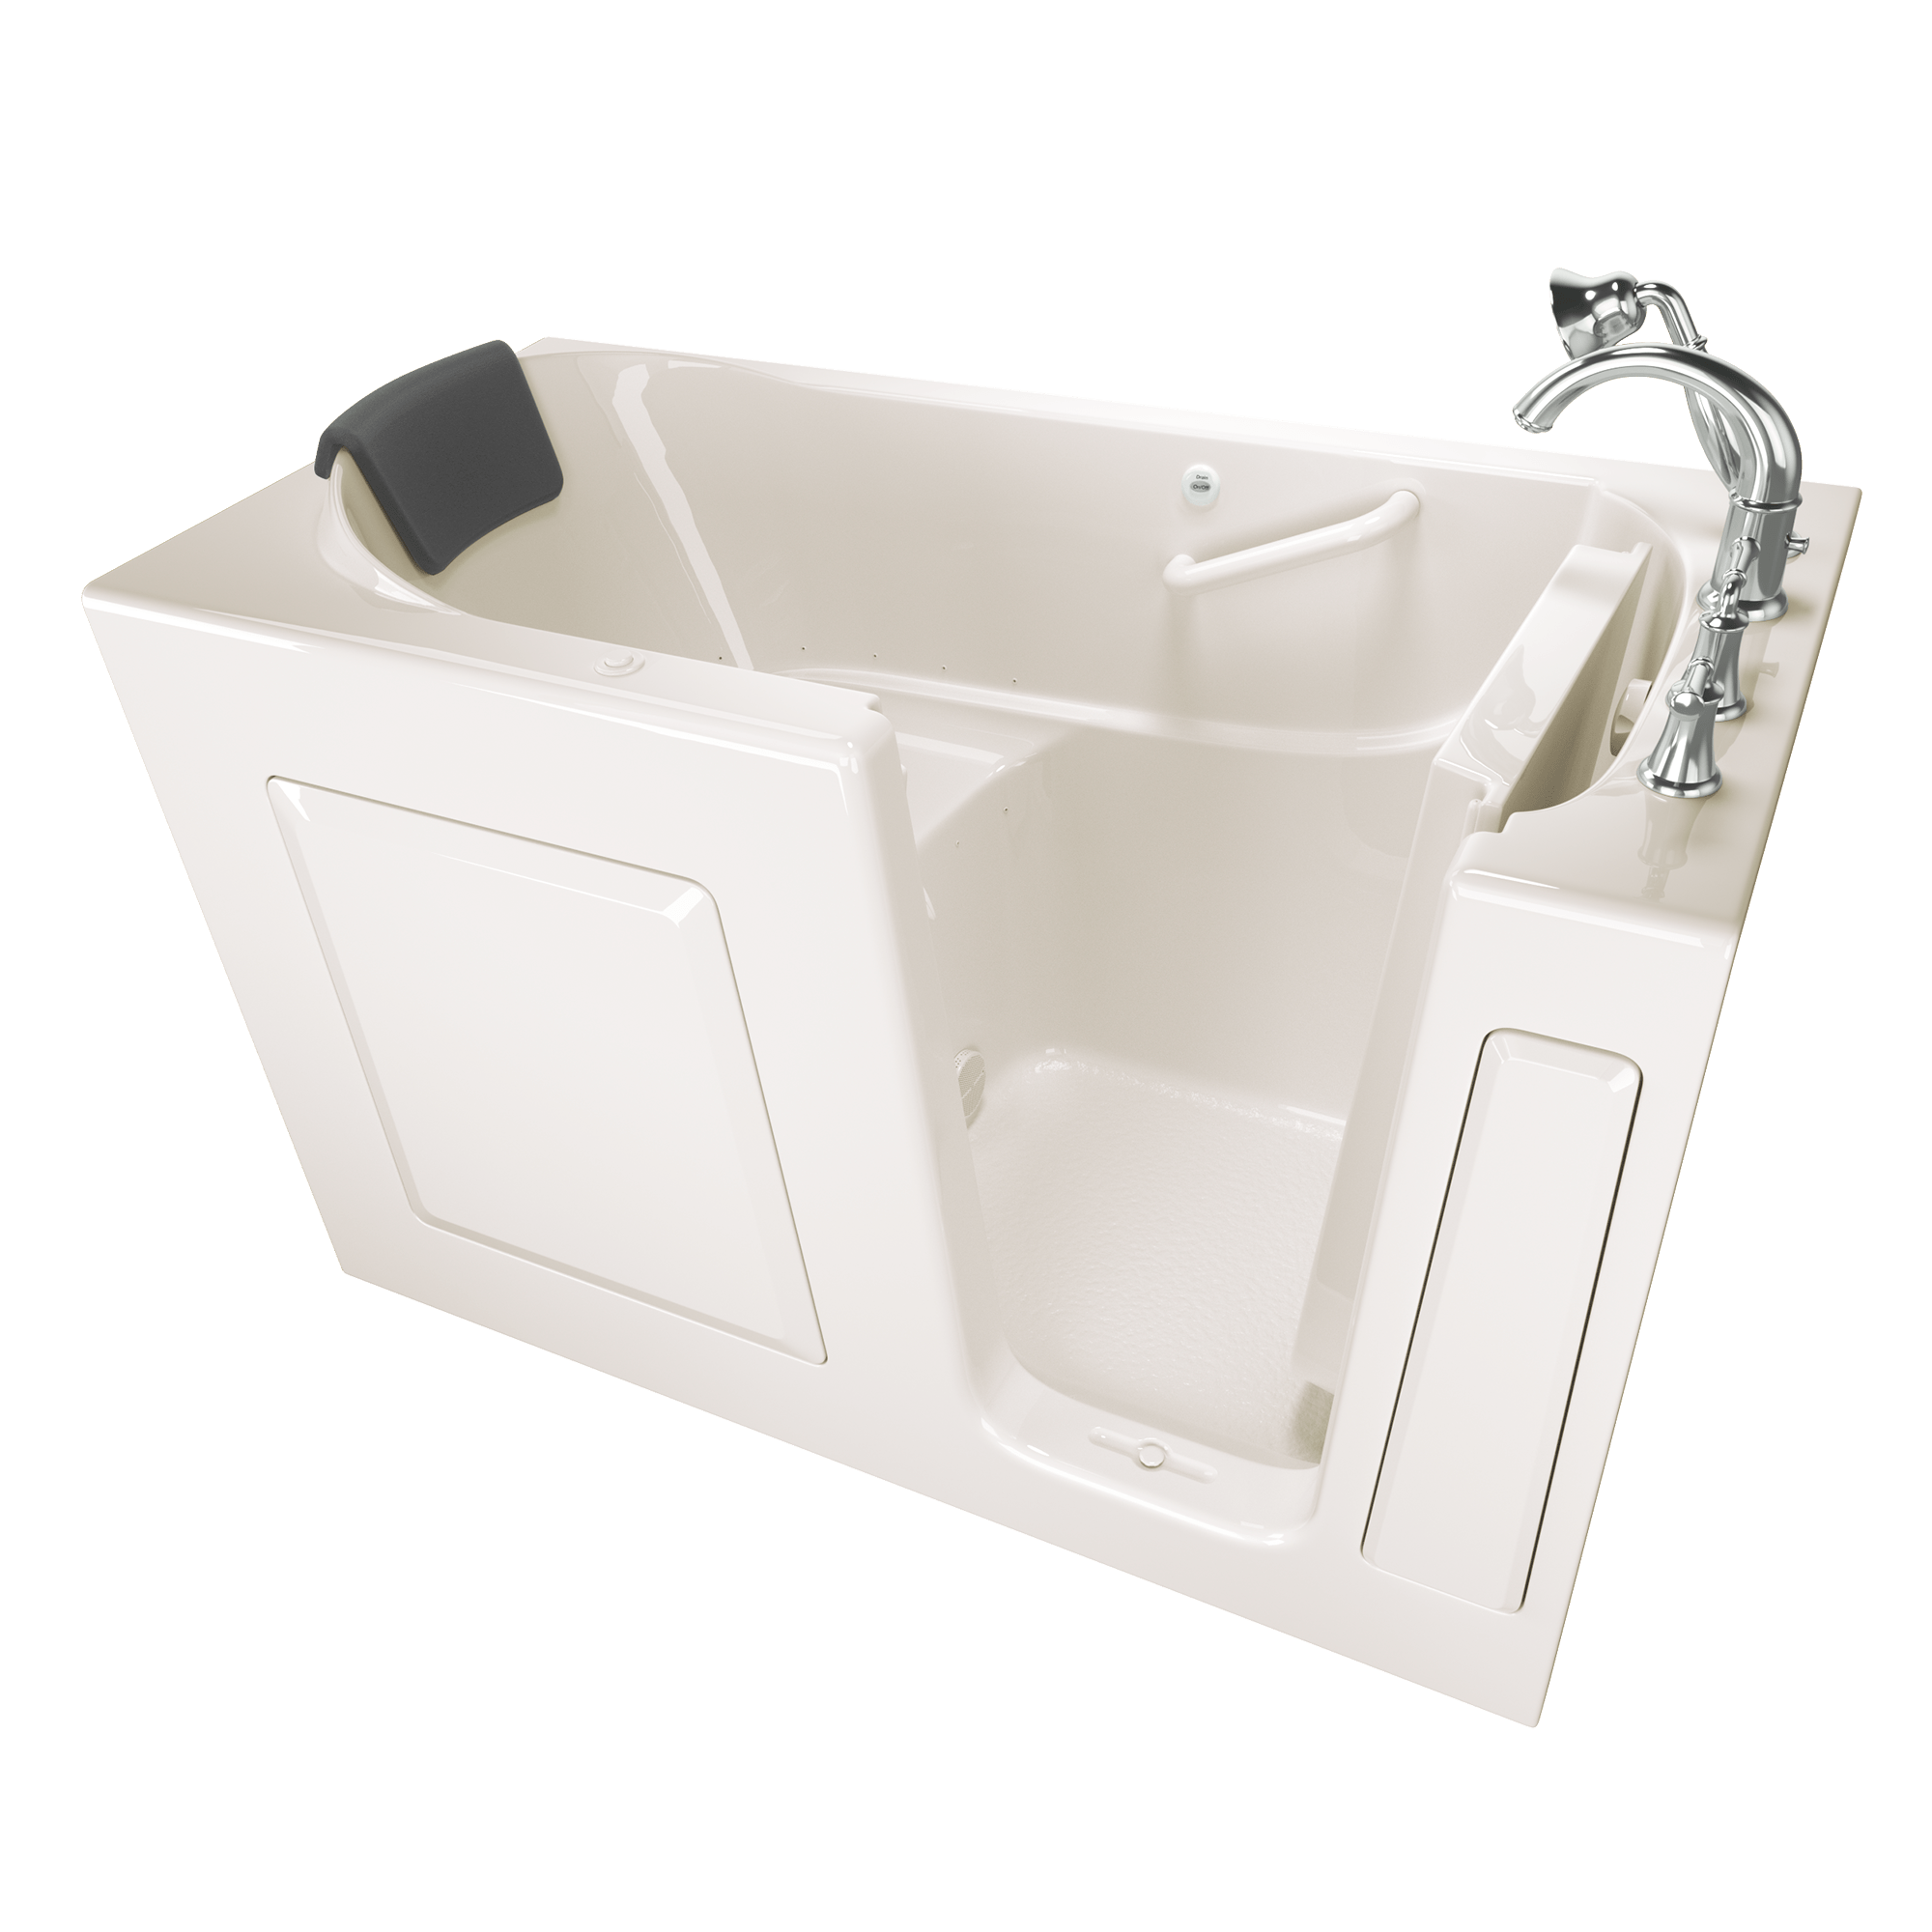 Gelcoat Premium Series 60x30 Inch Walk In Bathtub with Air Massage System   Right Hand Door and Drain ST BISCUIT